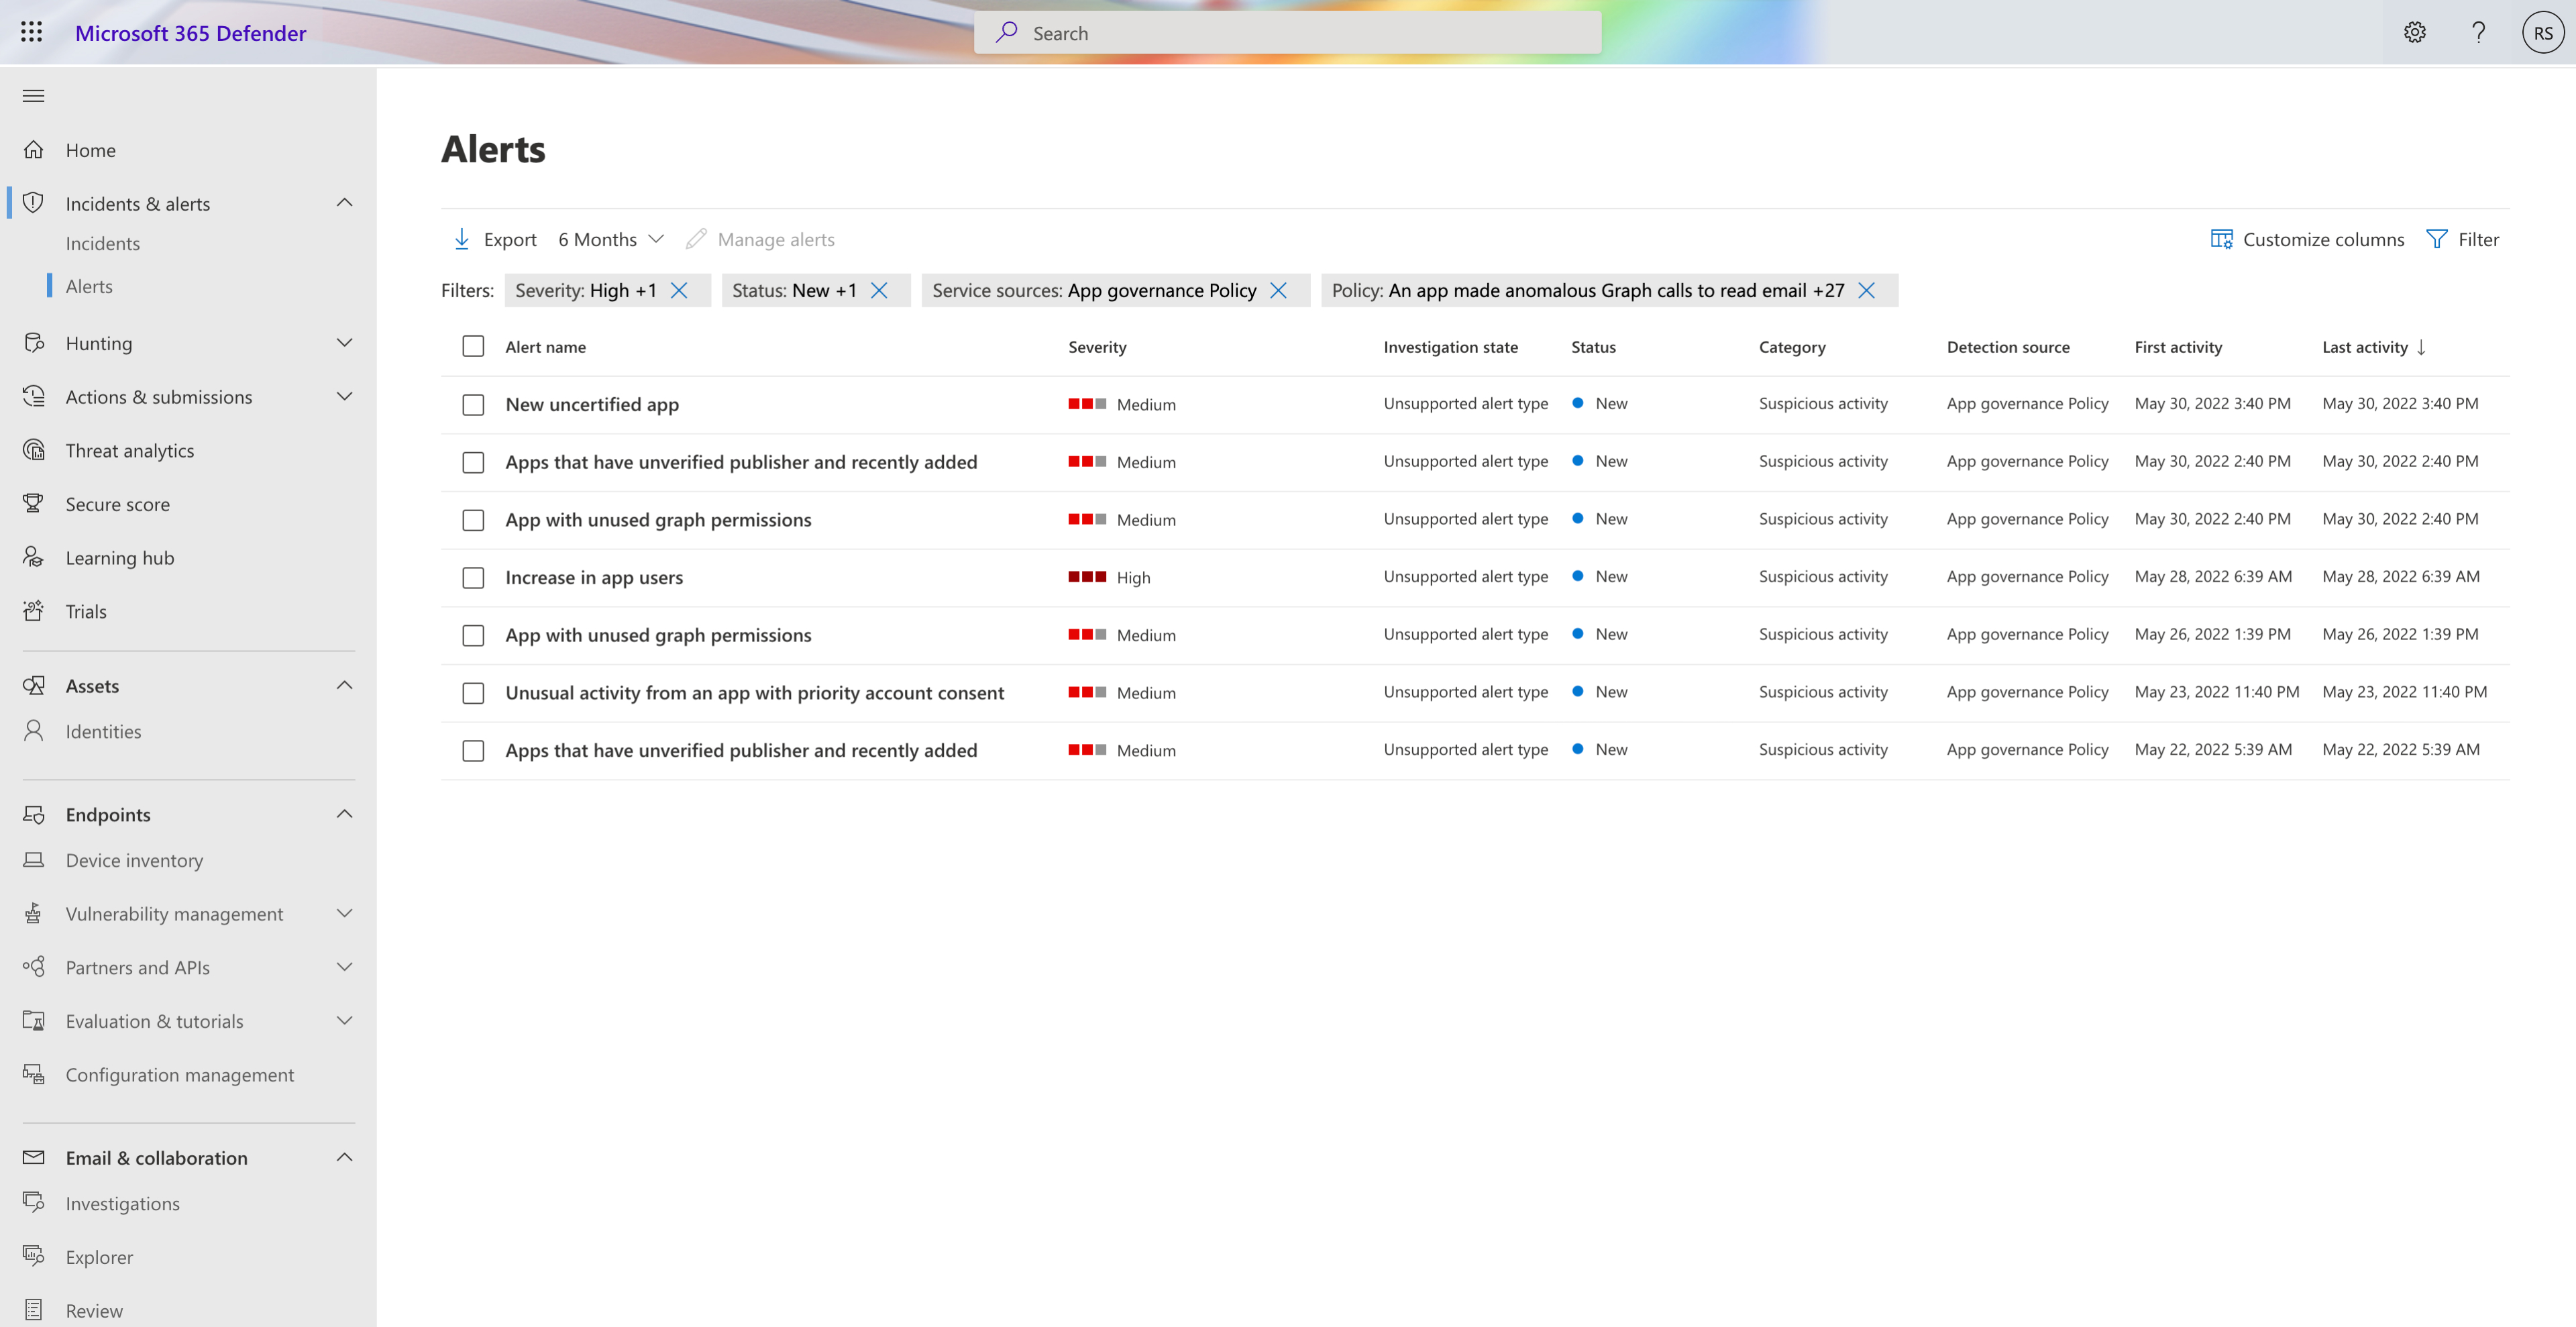 Screenshot of the app governance alerts summary page in the Microsoft 365 Defender.